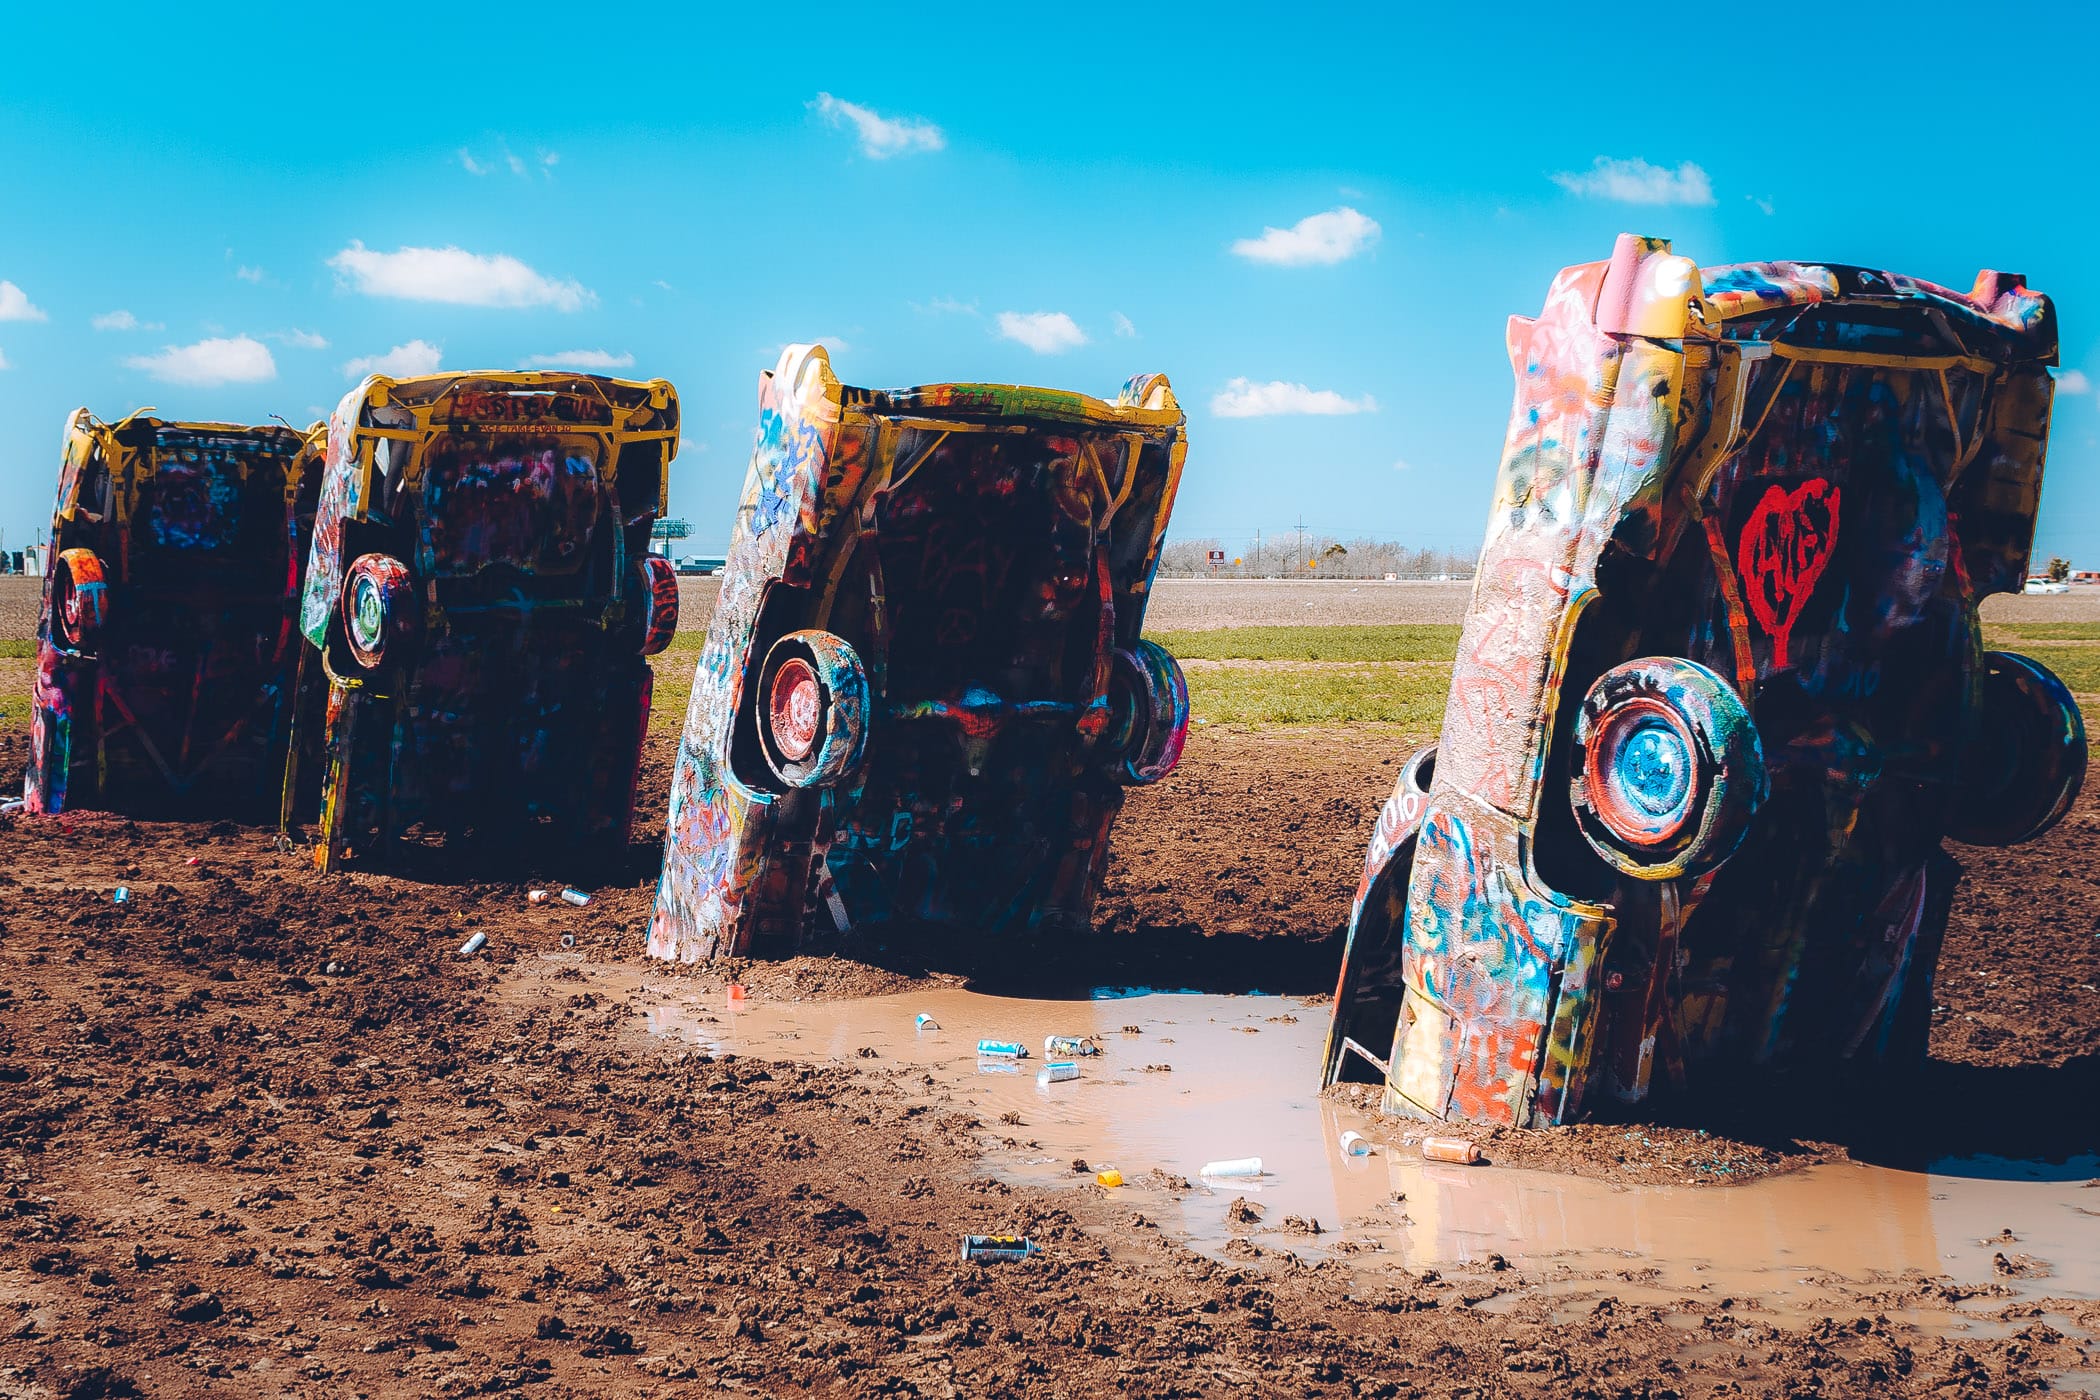 Four of the graffitied cars at Cadillac Ranch, Amarillo, Texas.